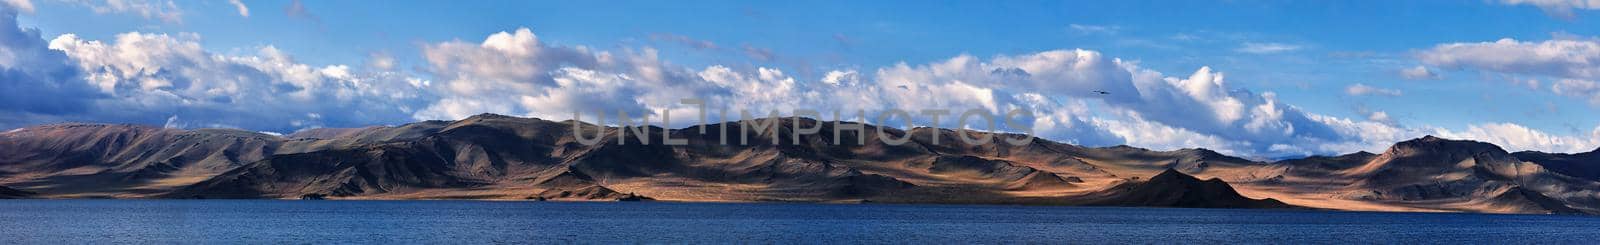 Panorama of a mountain lake. Somewhere in the vastness of Mongolia. by EvgeniyQW